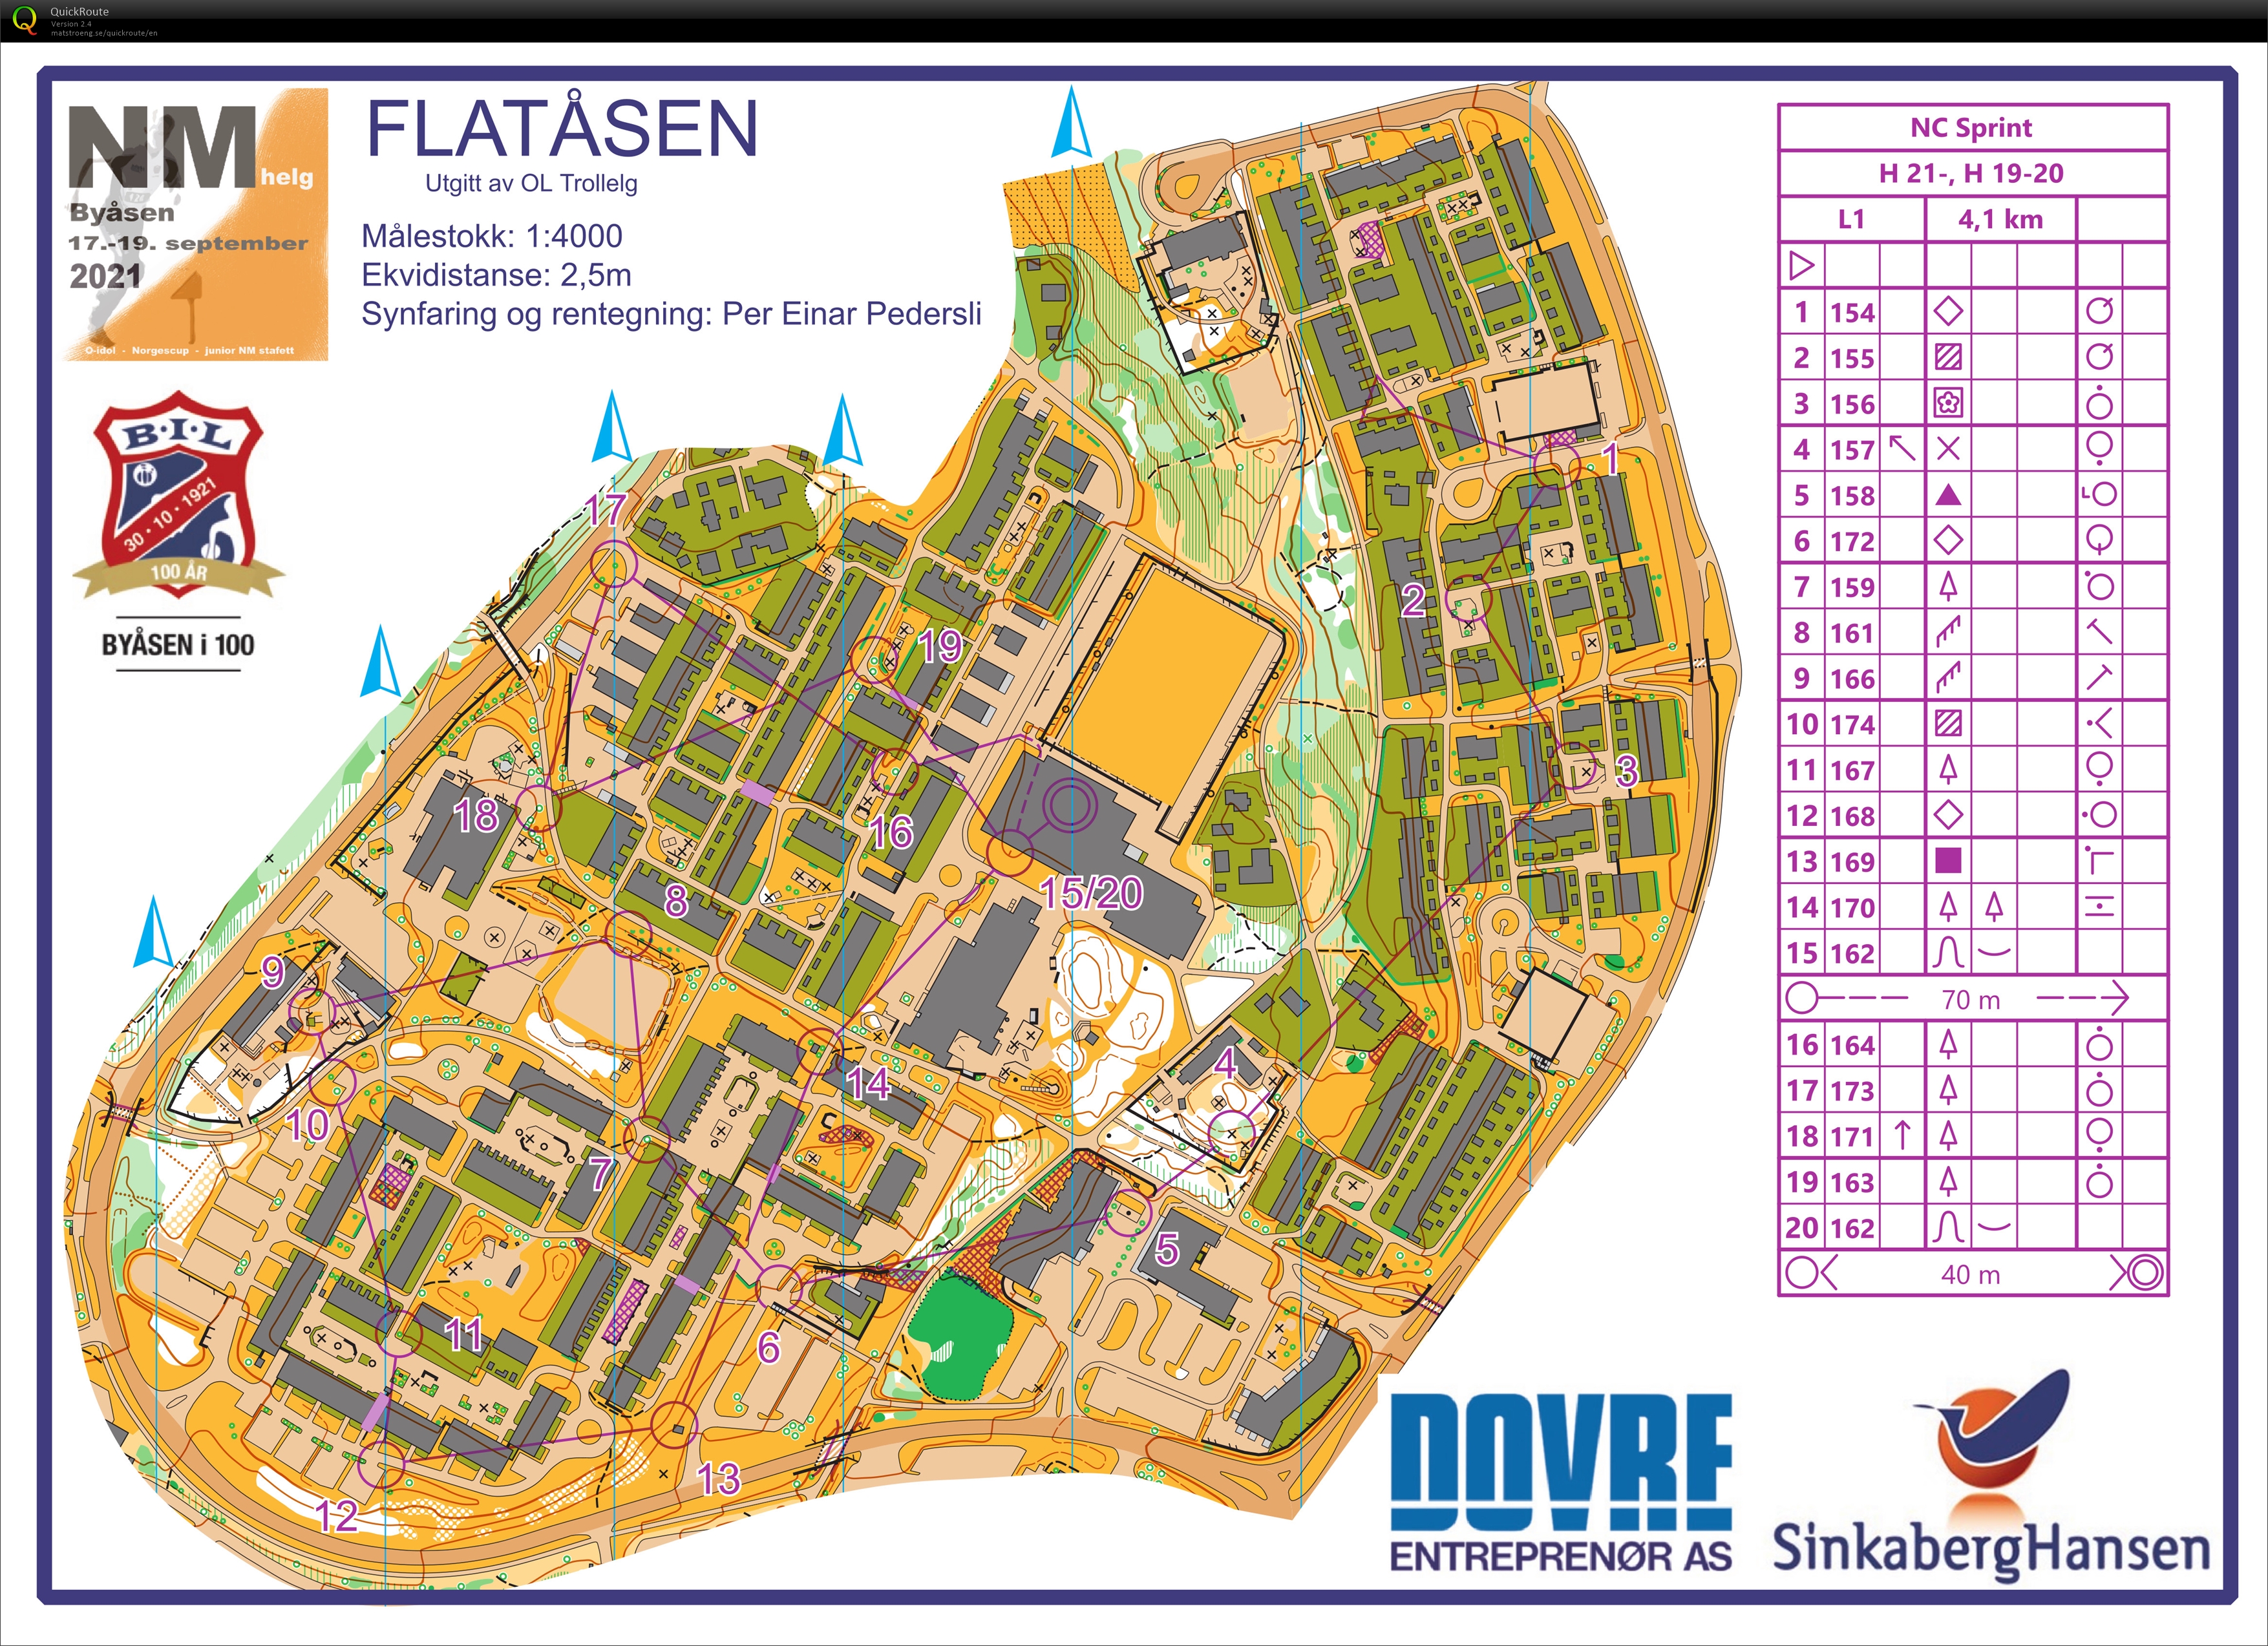 Norgescup Sprint (17/09/2021)